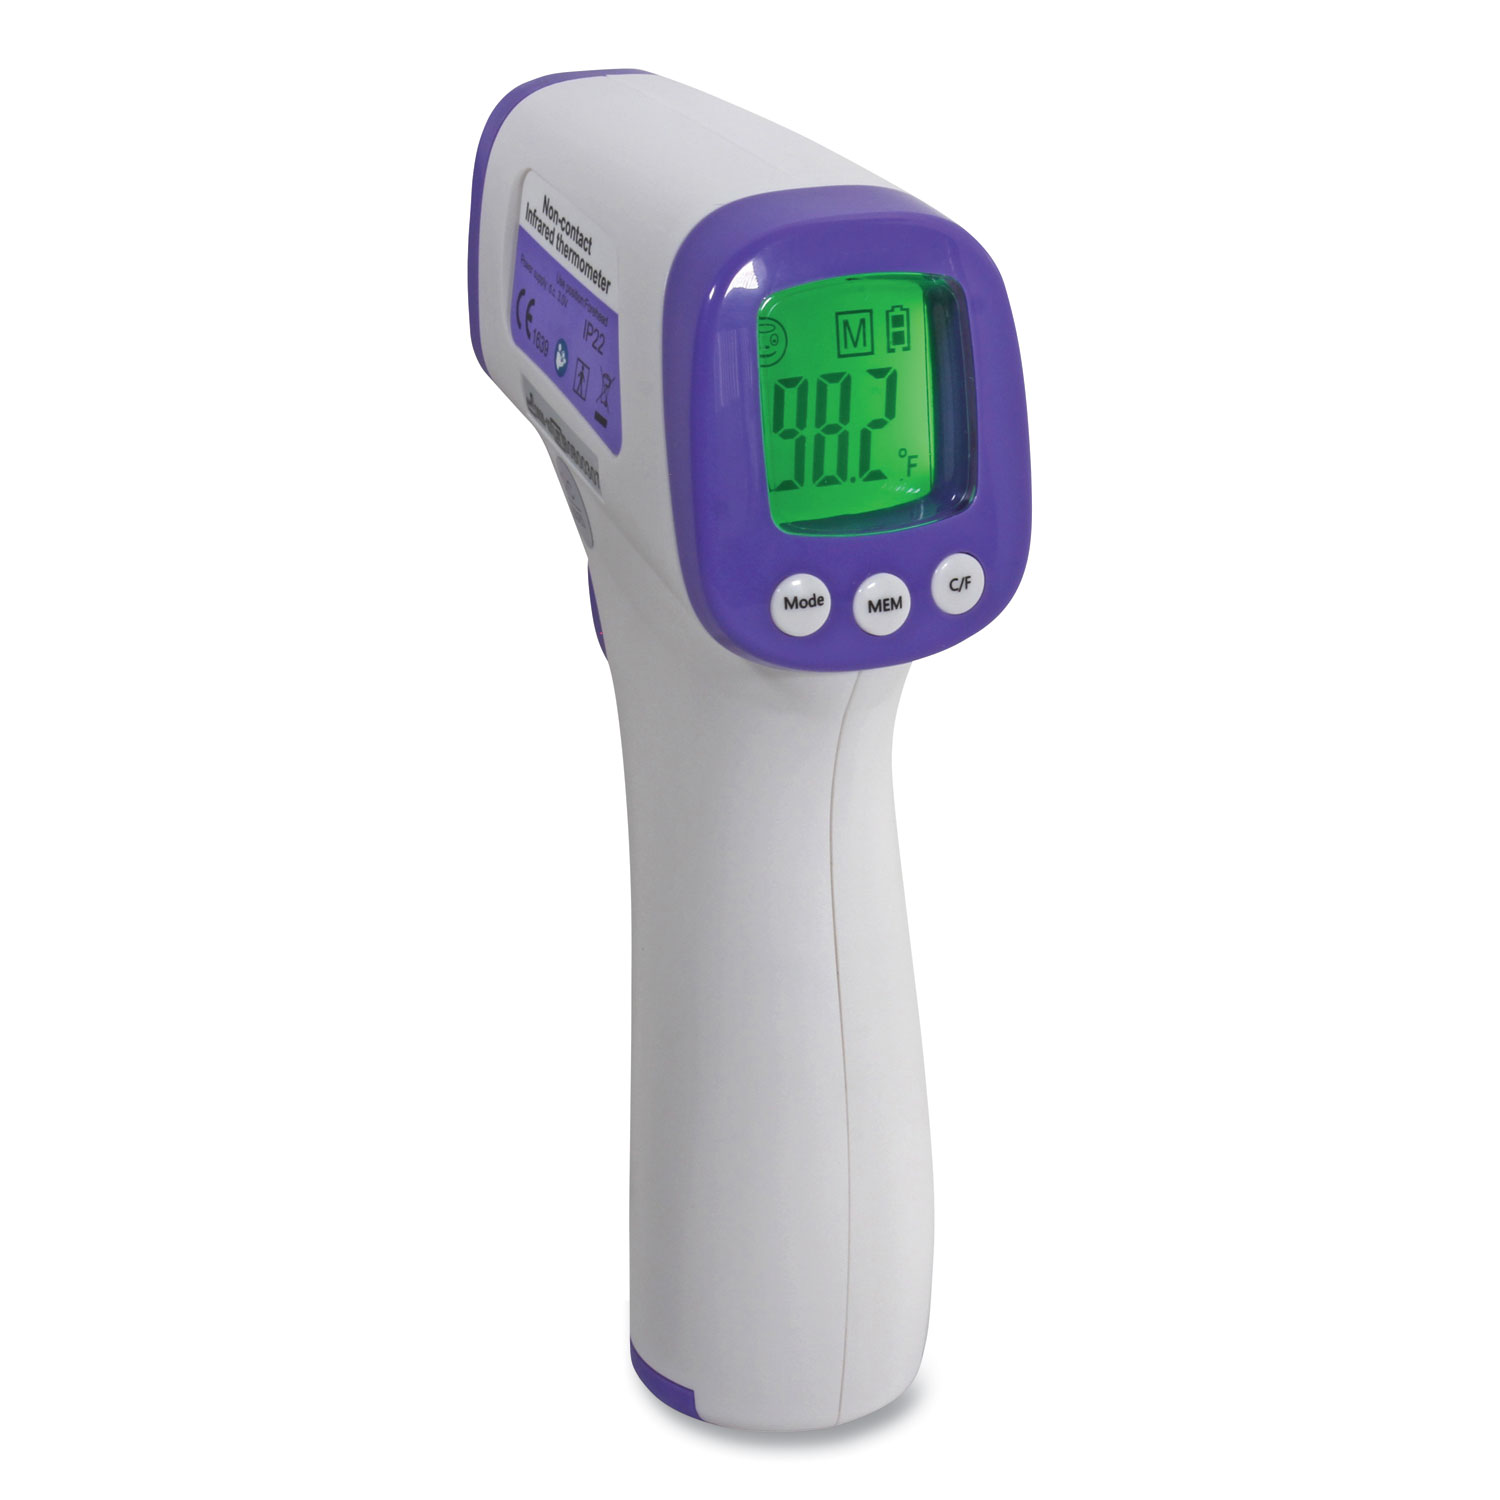  San Jamar Non-Contact Infrared Thermometer, Digital, White (SJMTHDG986) 